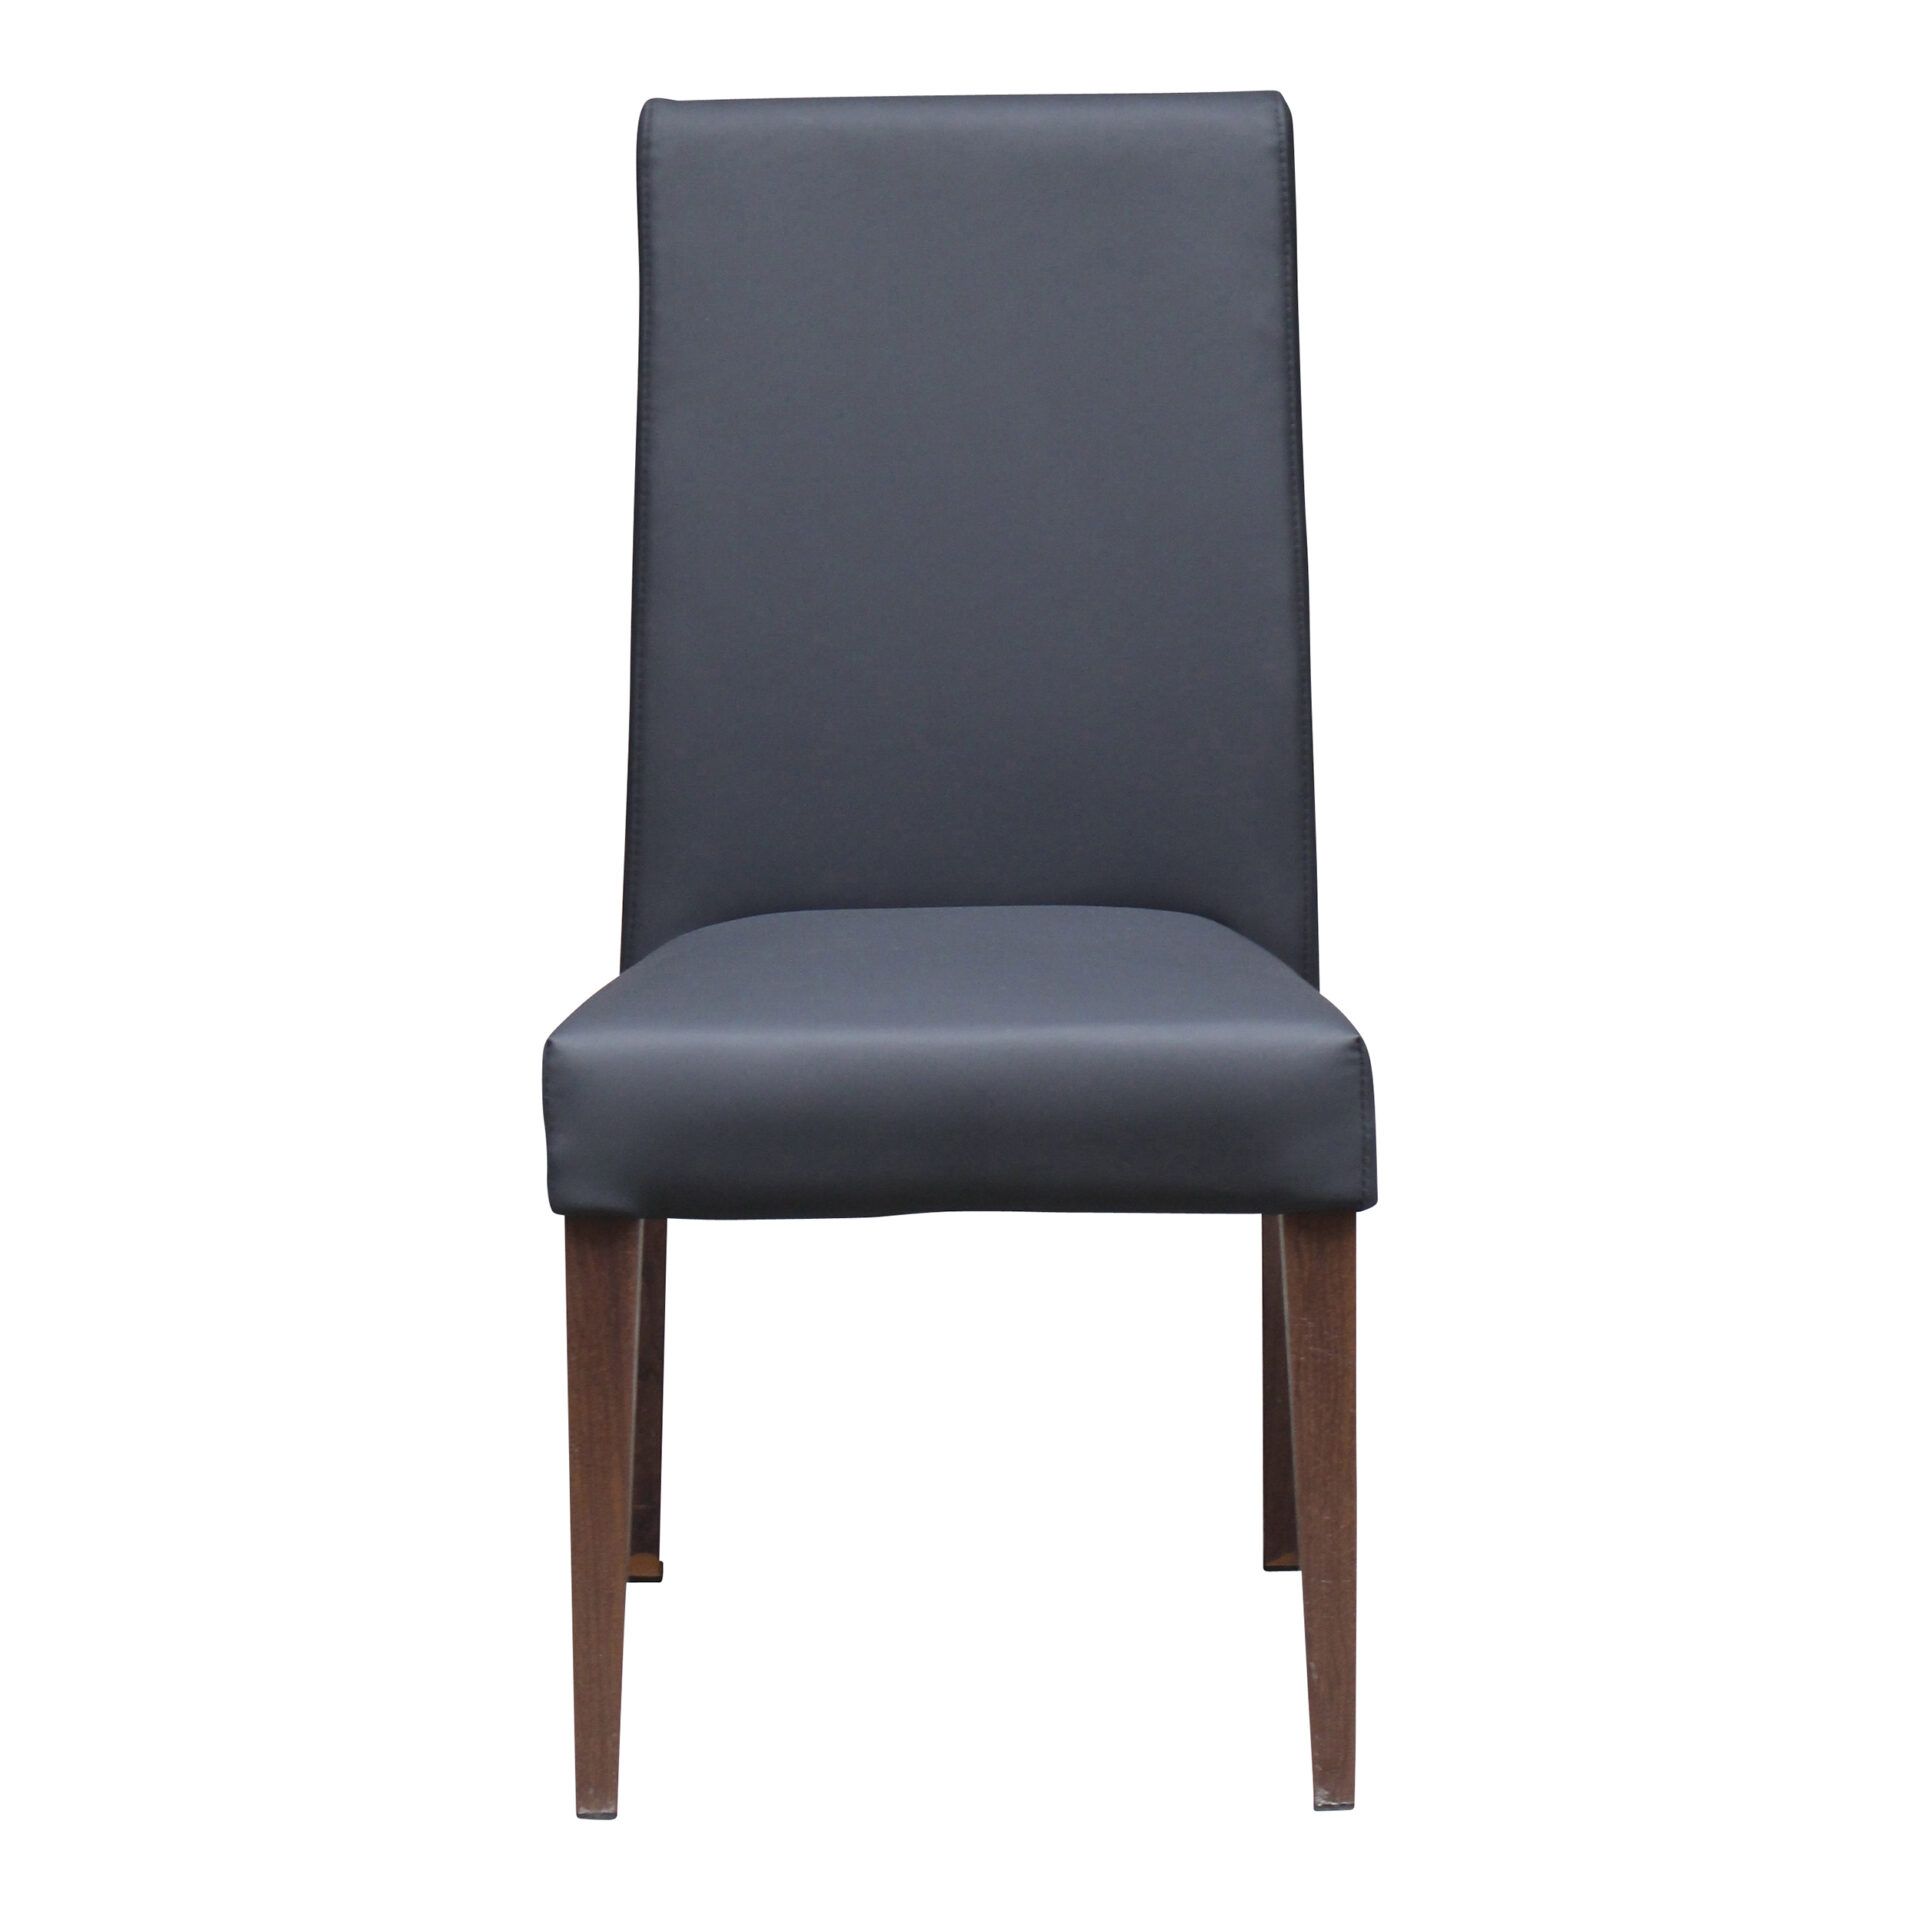 London Chair Black Front 1